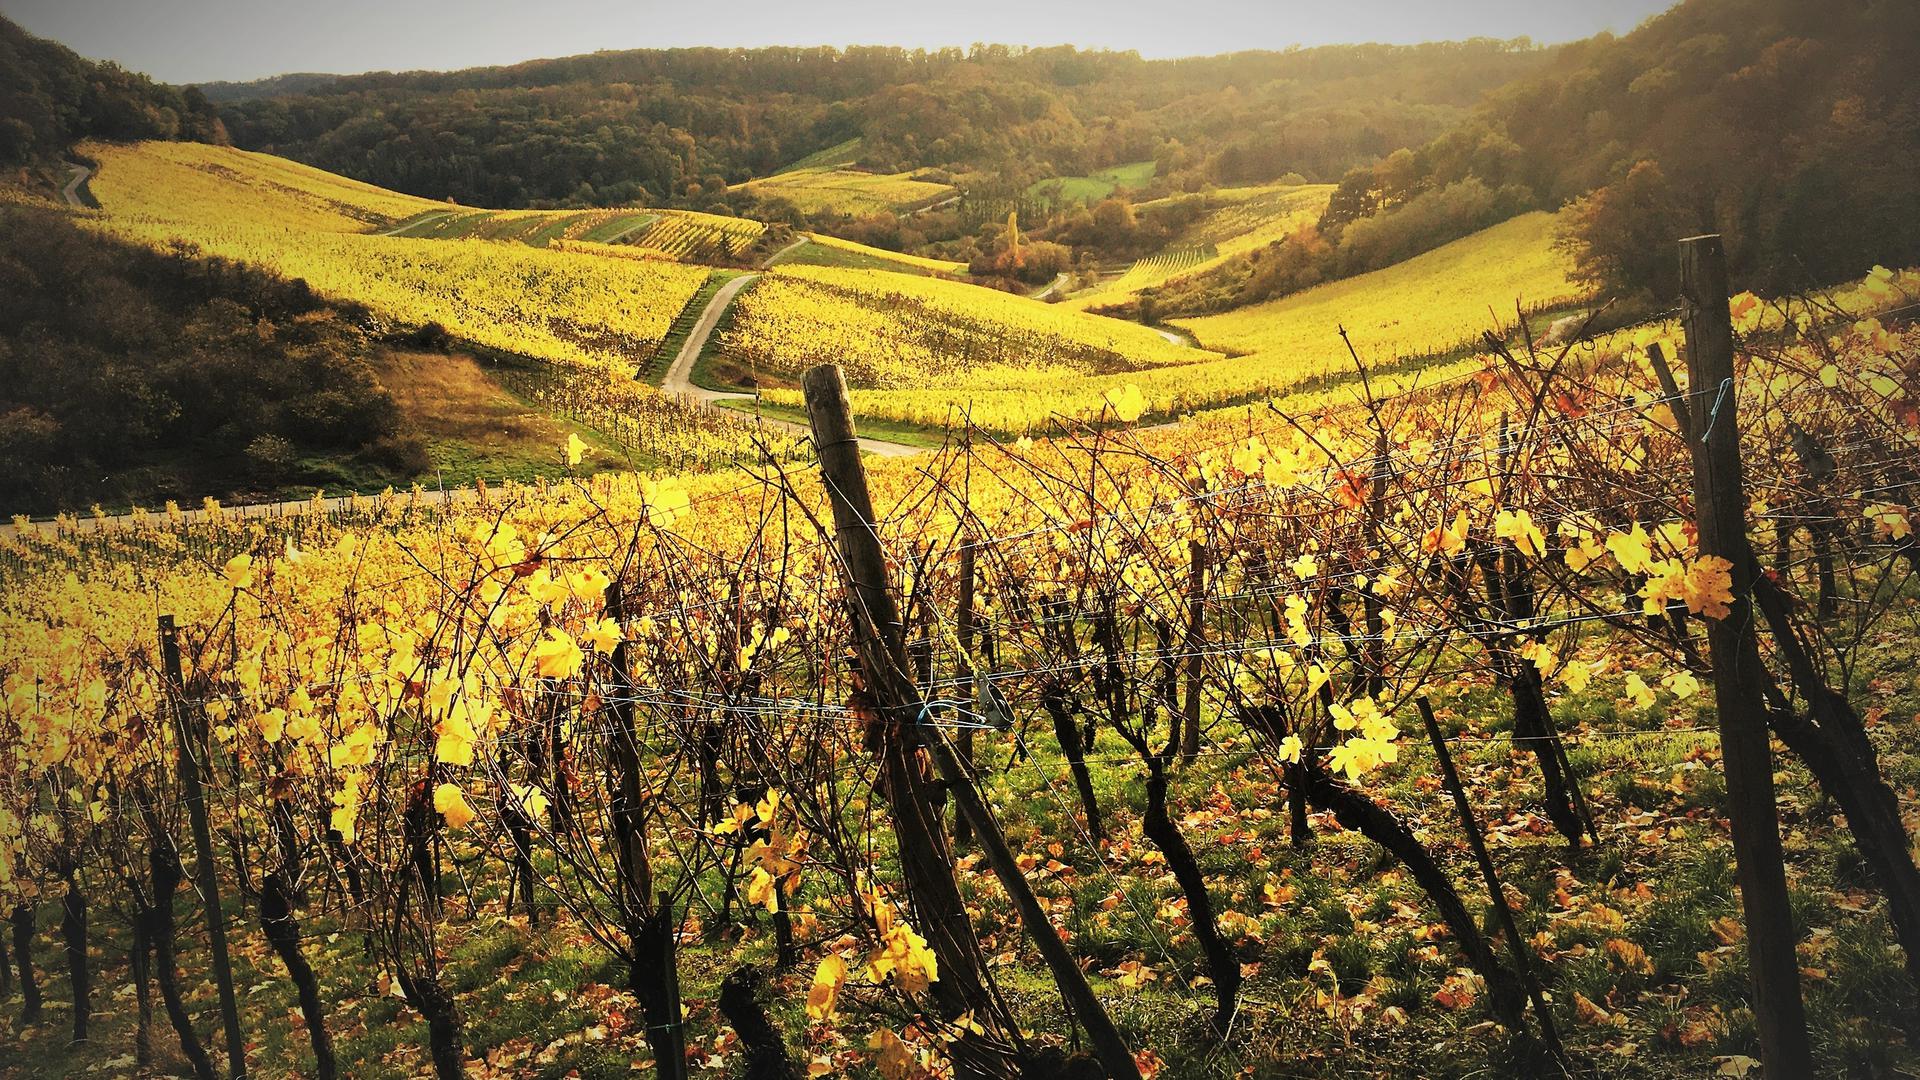 Luxembourg's famous wine growing region, the Moselle